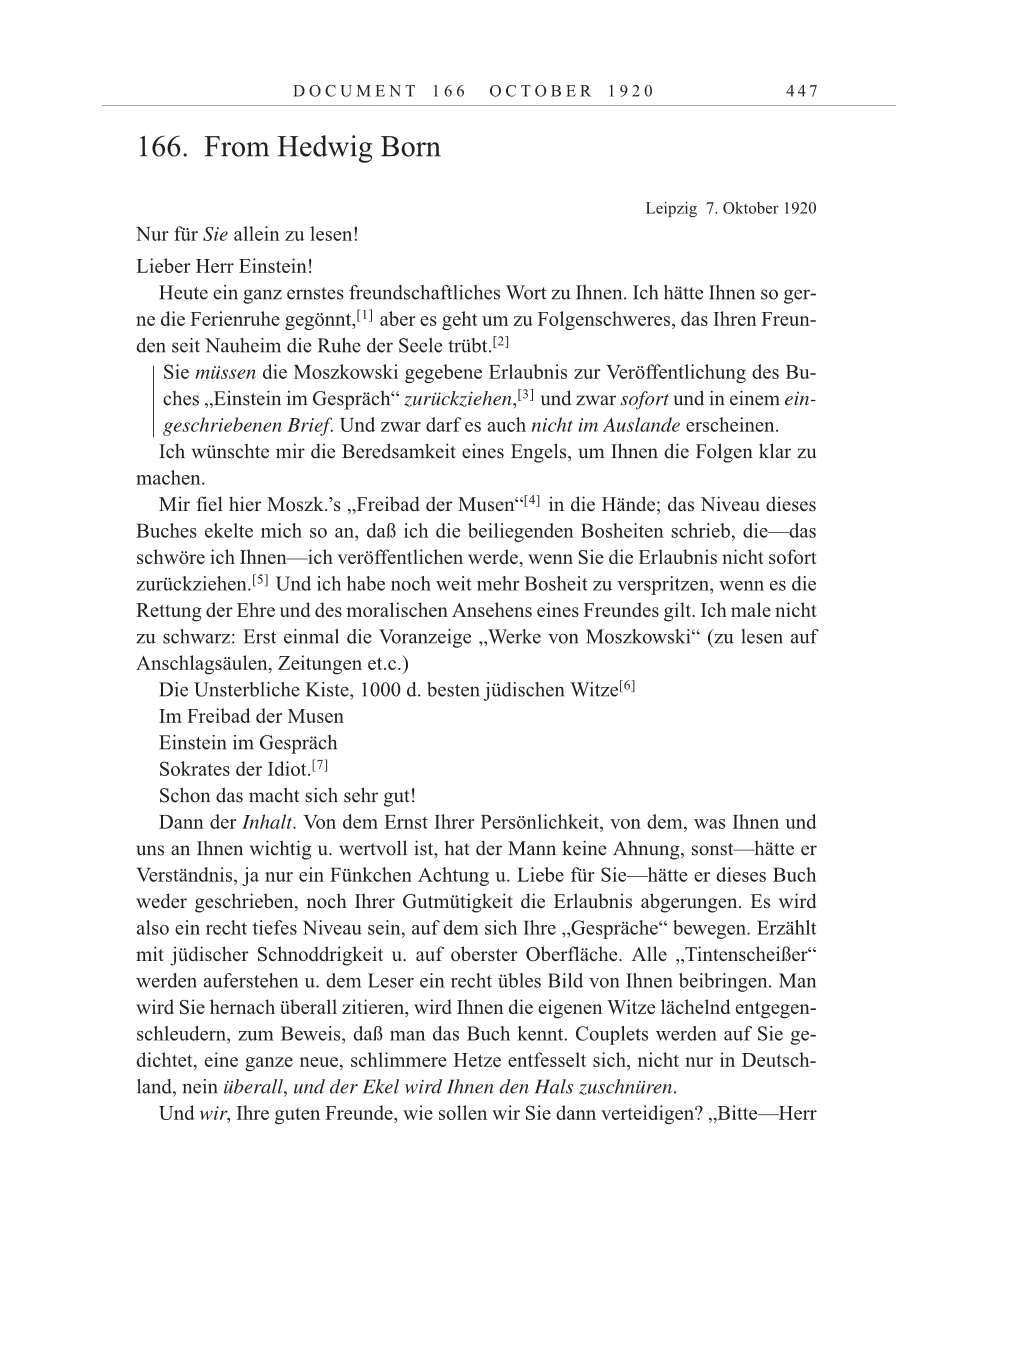 Volume 10: The Berlin Years: Correspondence May-December 1920 / Supplementary Correspondence 1909-1920 page 447